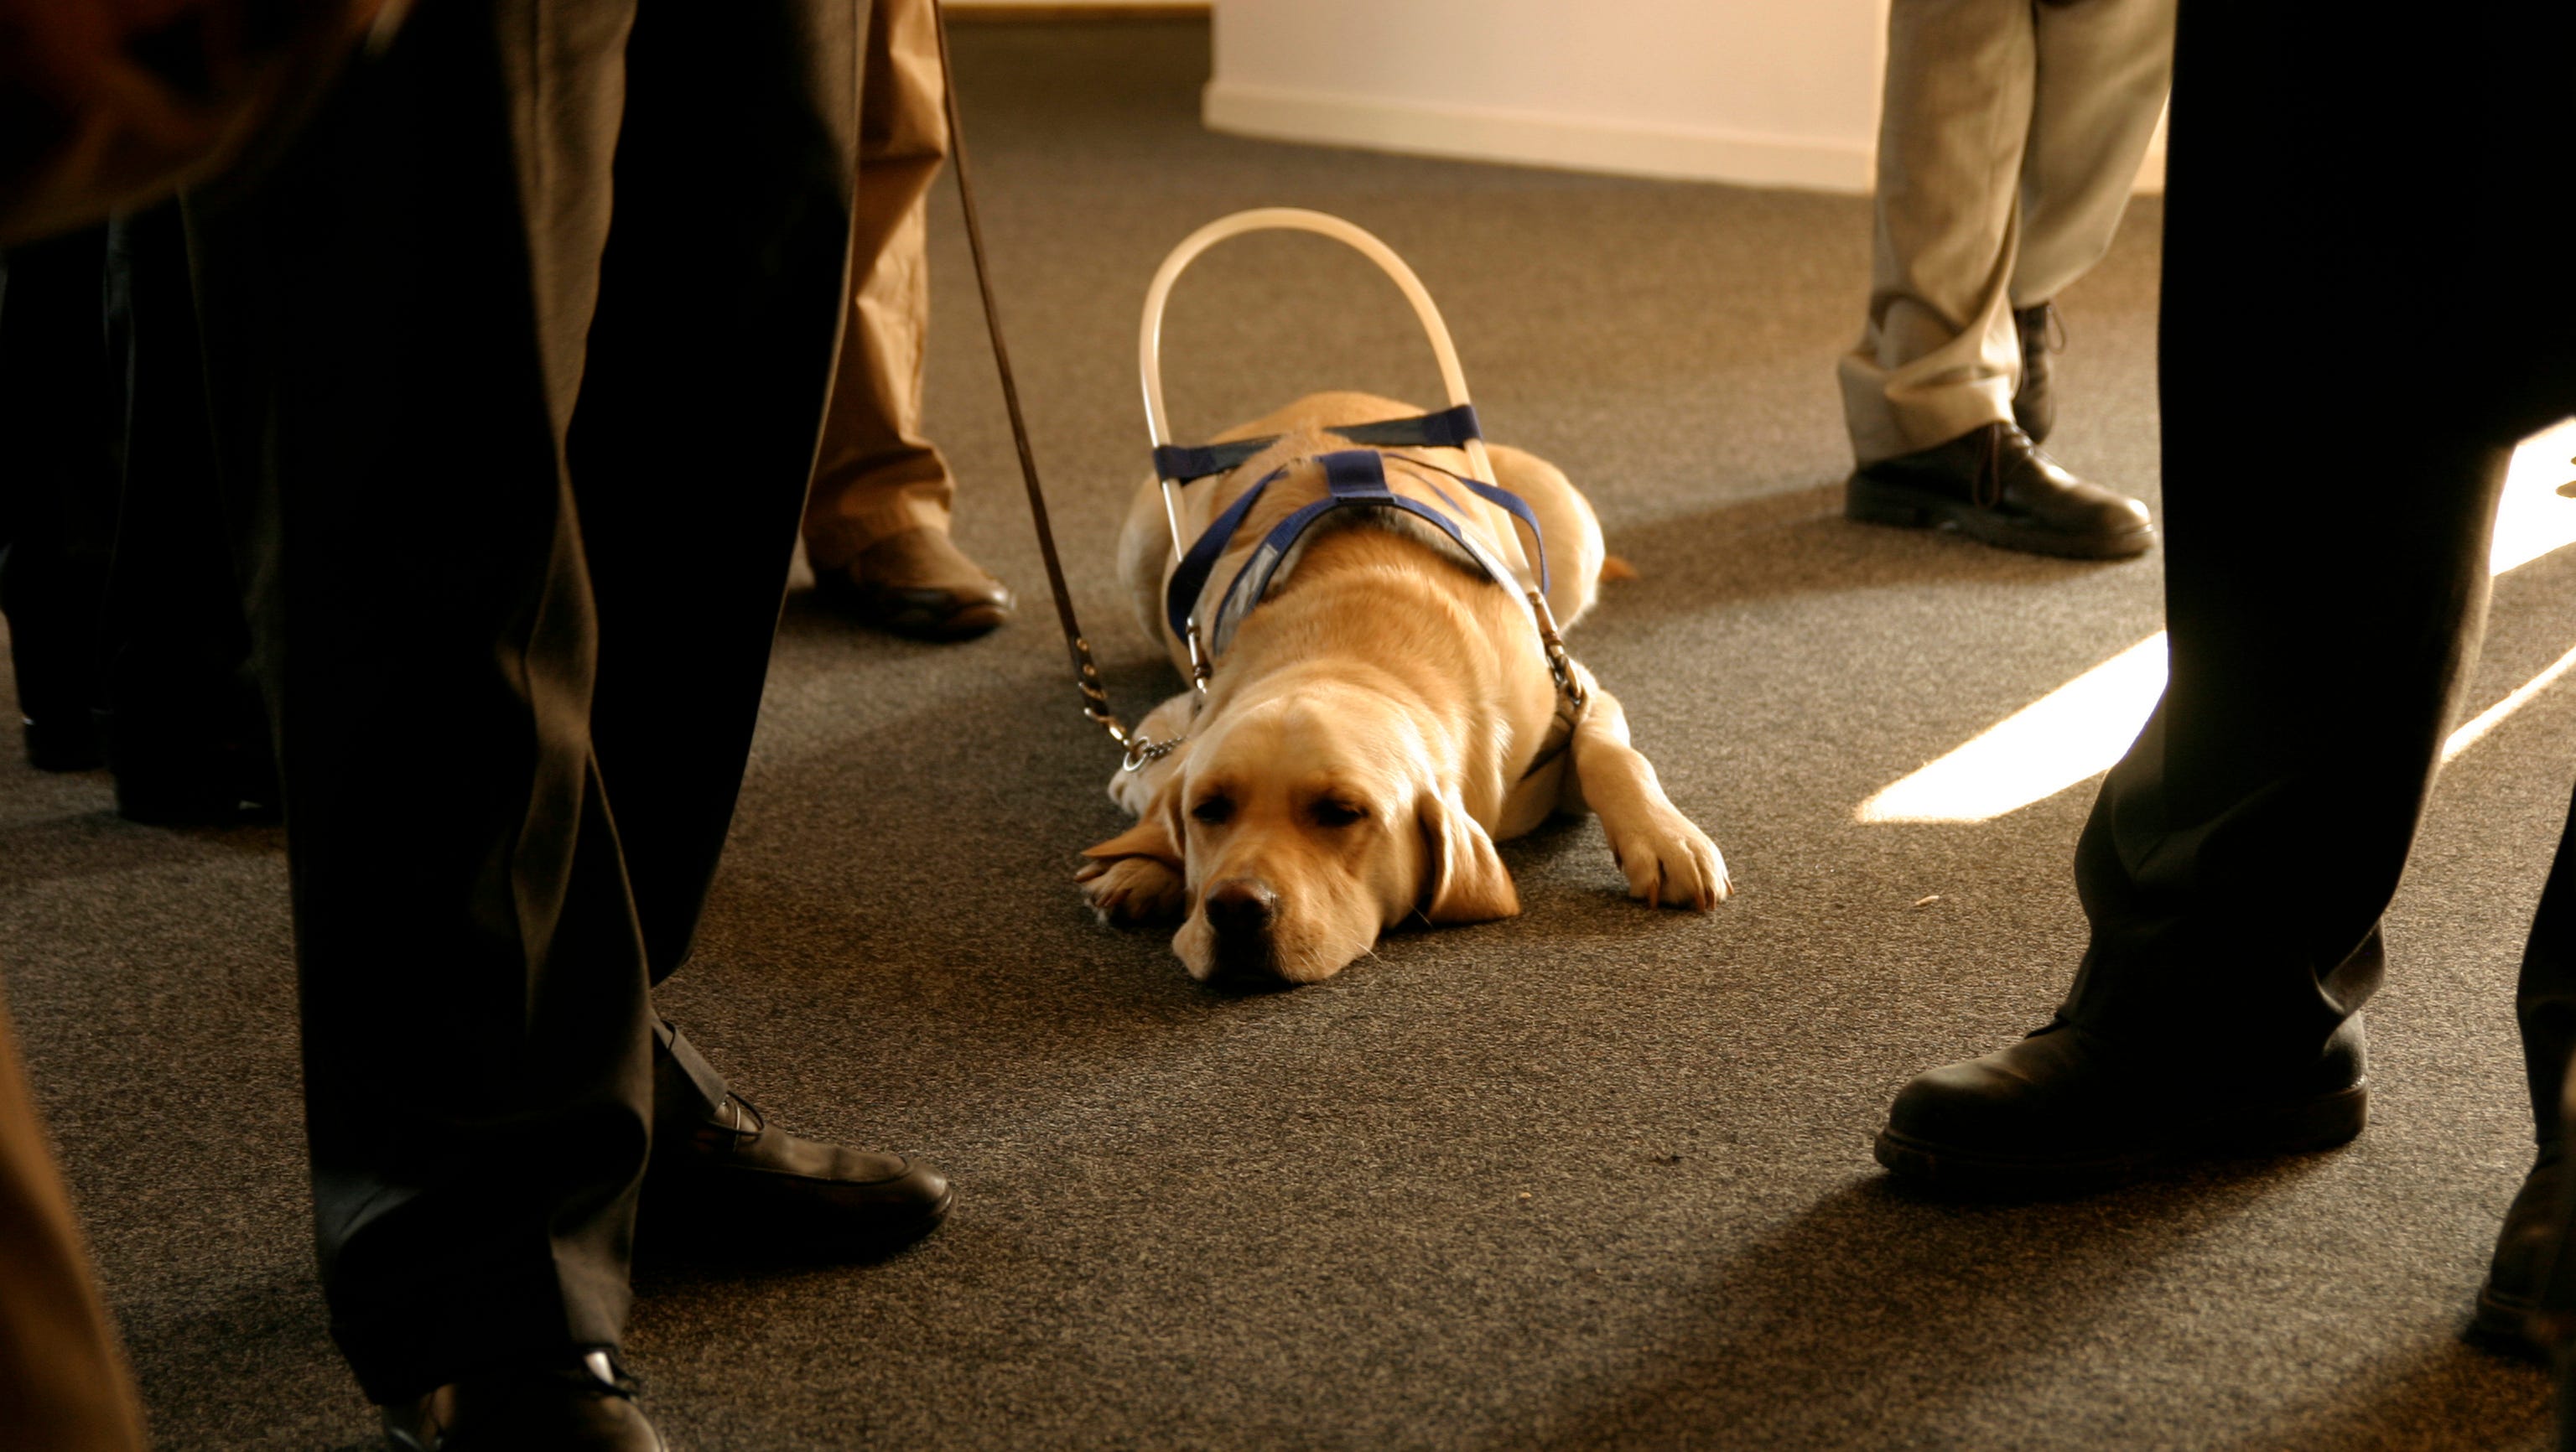 Crossing the line from pet to service animal